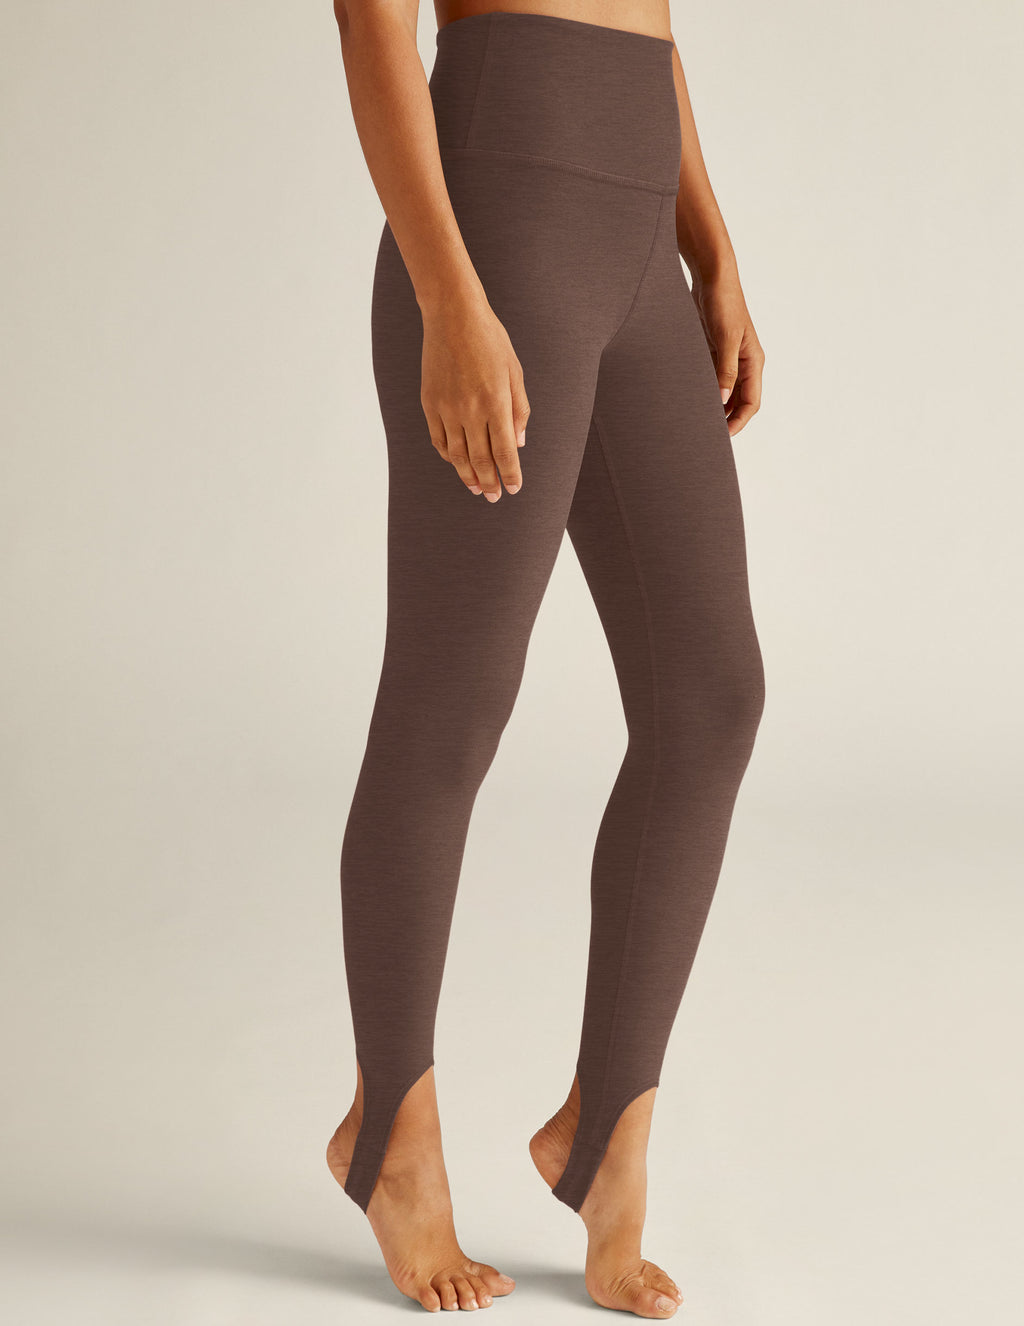 Spacedye Well Rounded Stirrup Legging Secondary Image